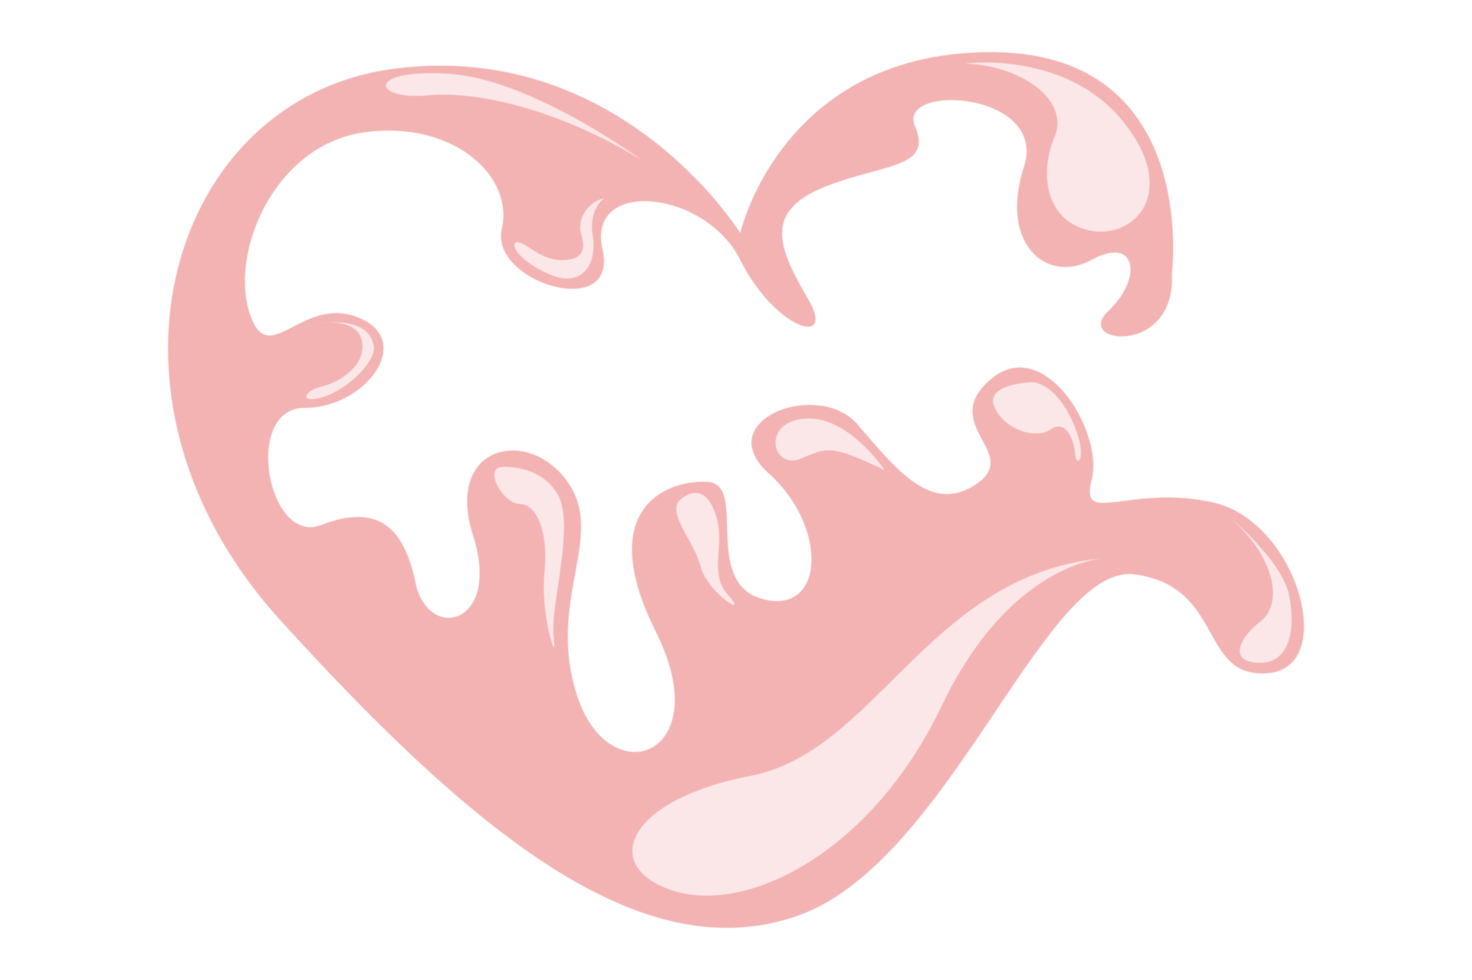 Valentine - Melted Pink Love Chocolate png